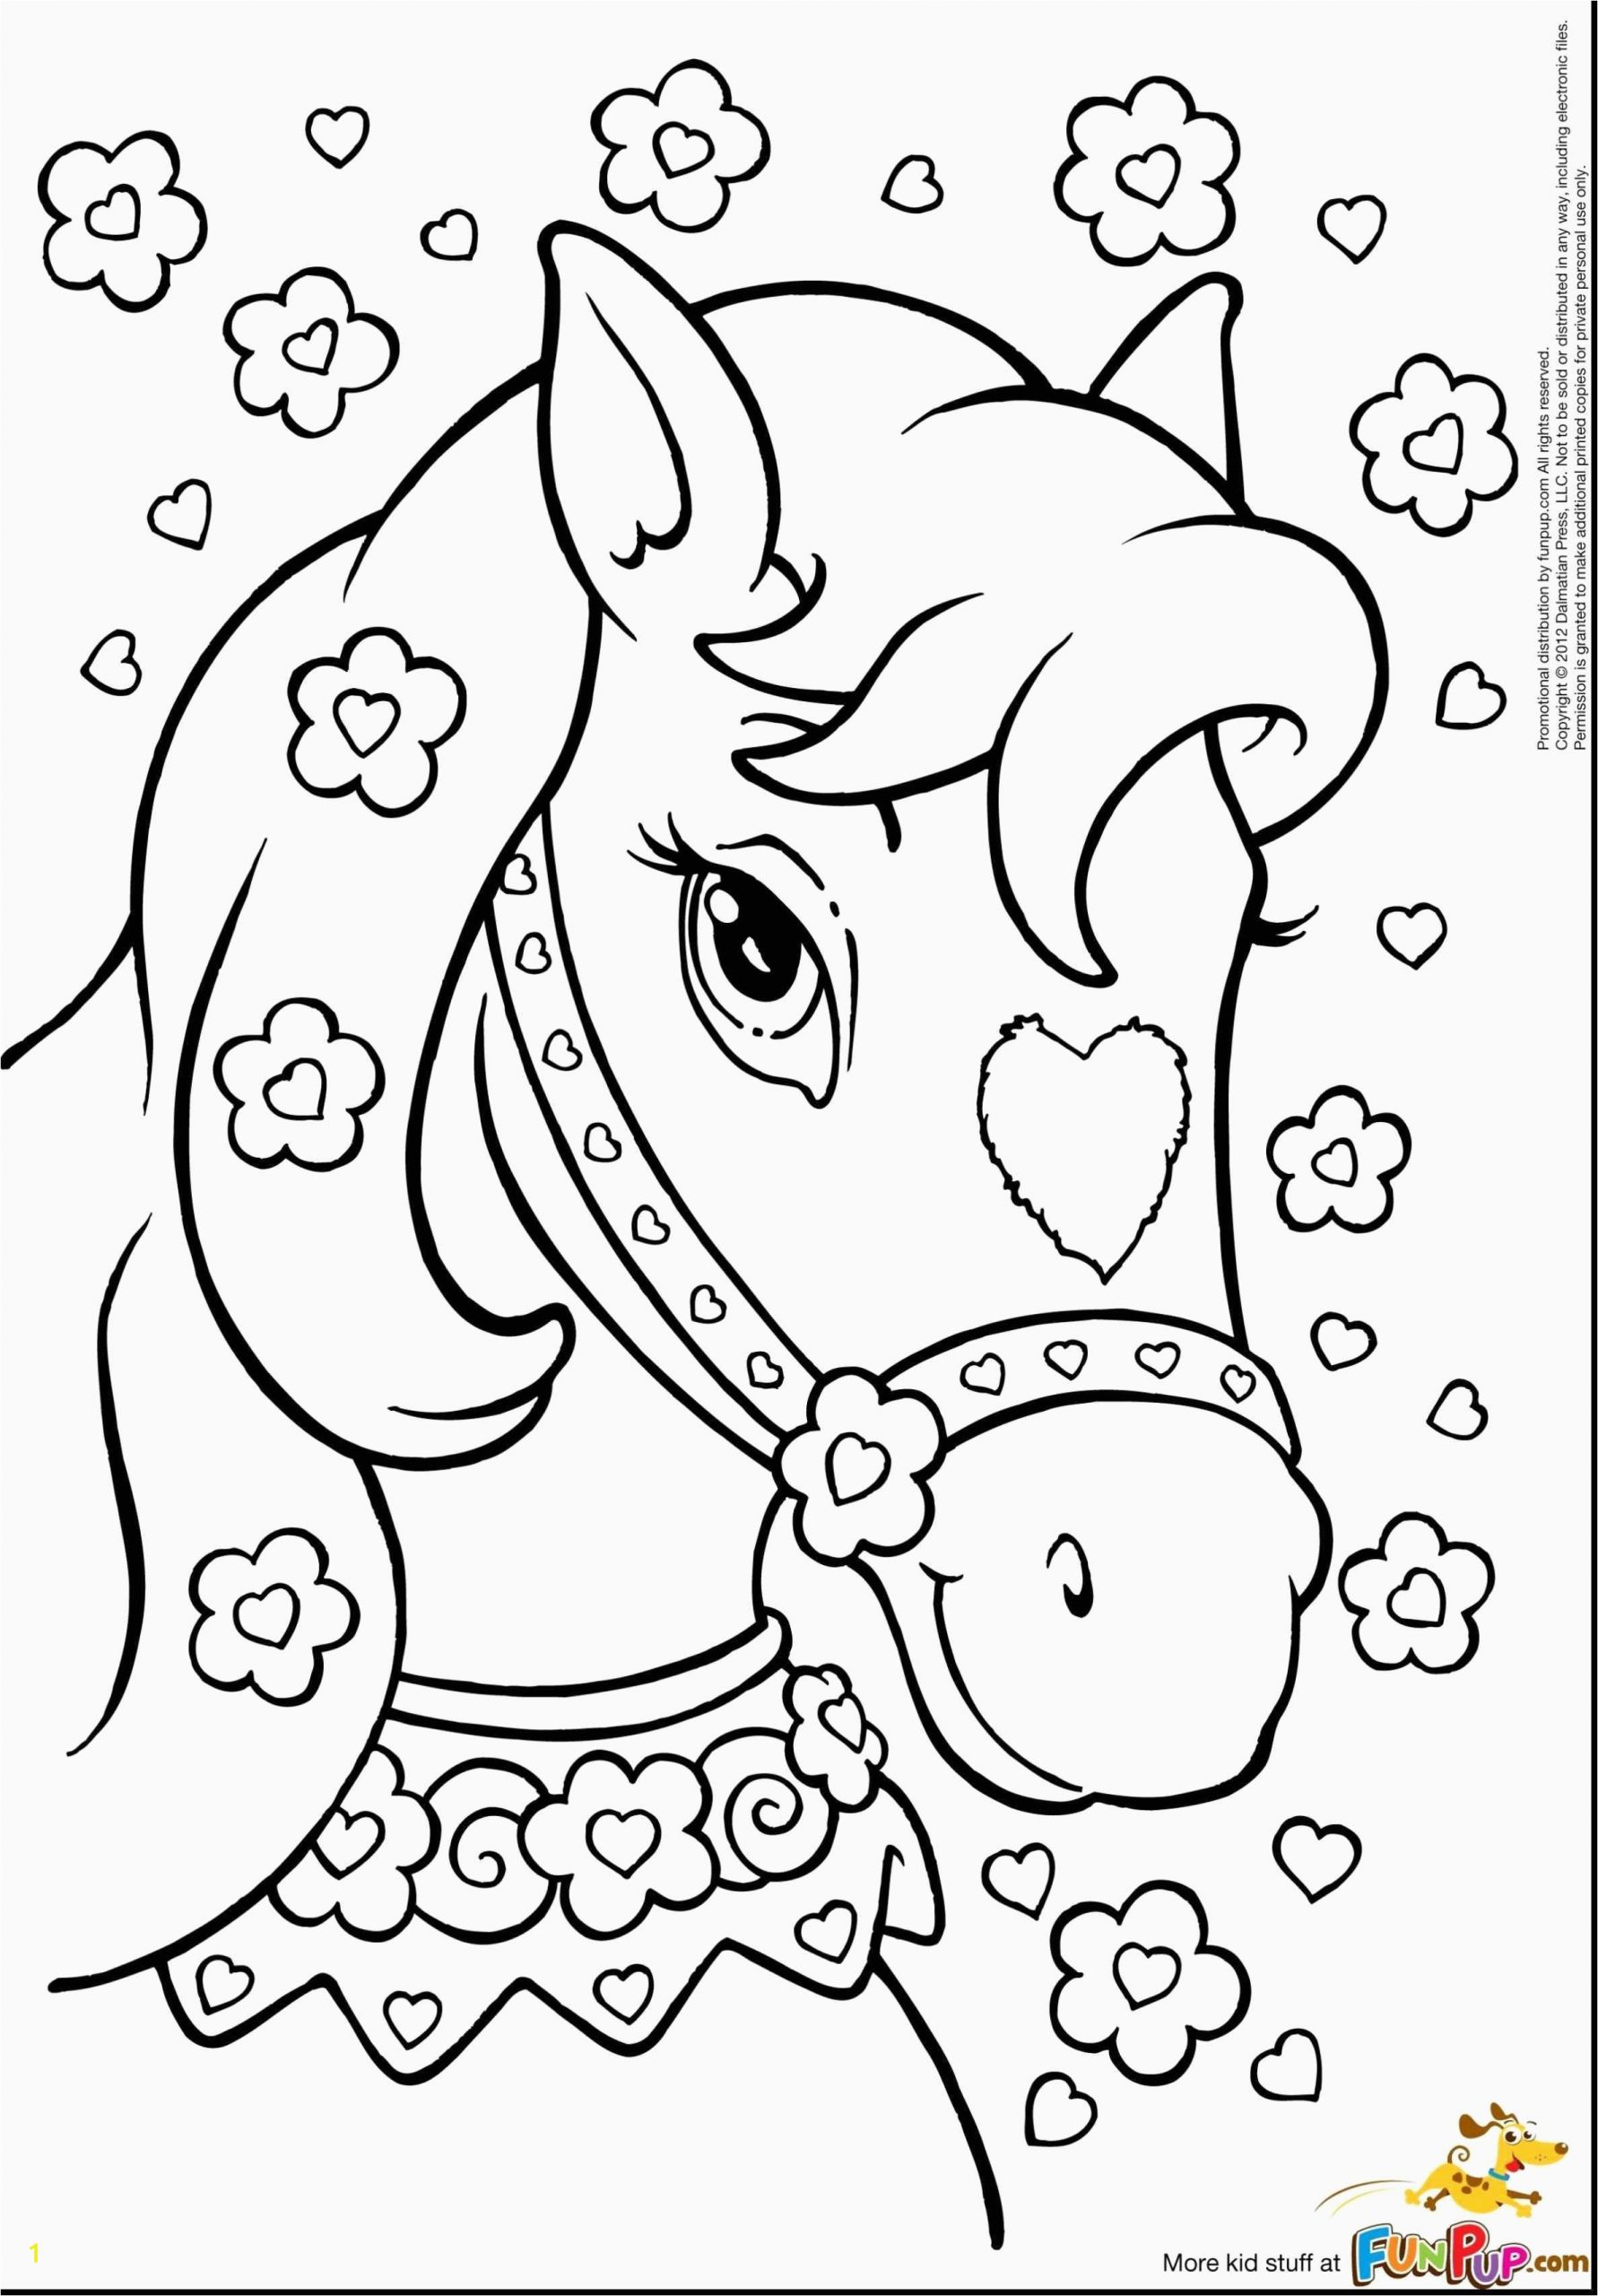 Coloring Pages for Girls Horses Coloring African Animals Beautiful Disney Princesses